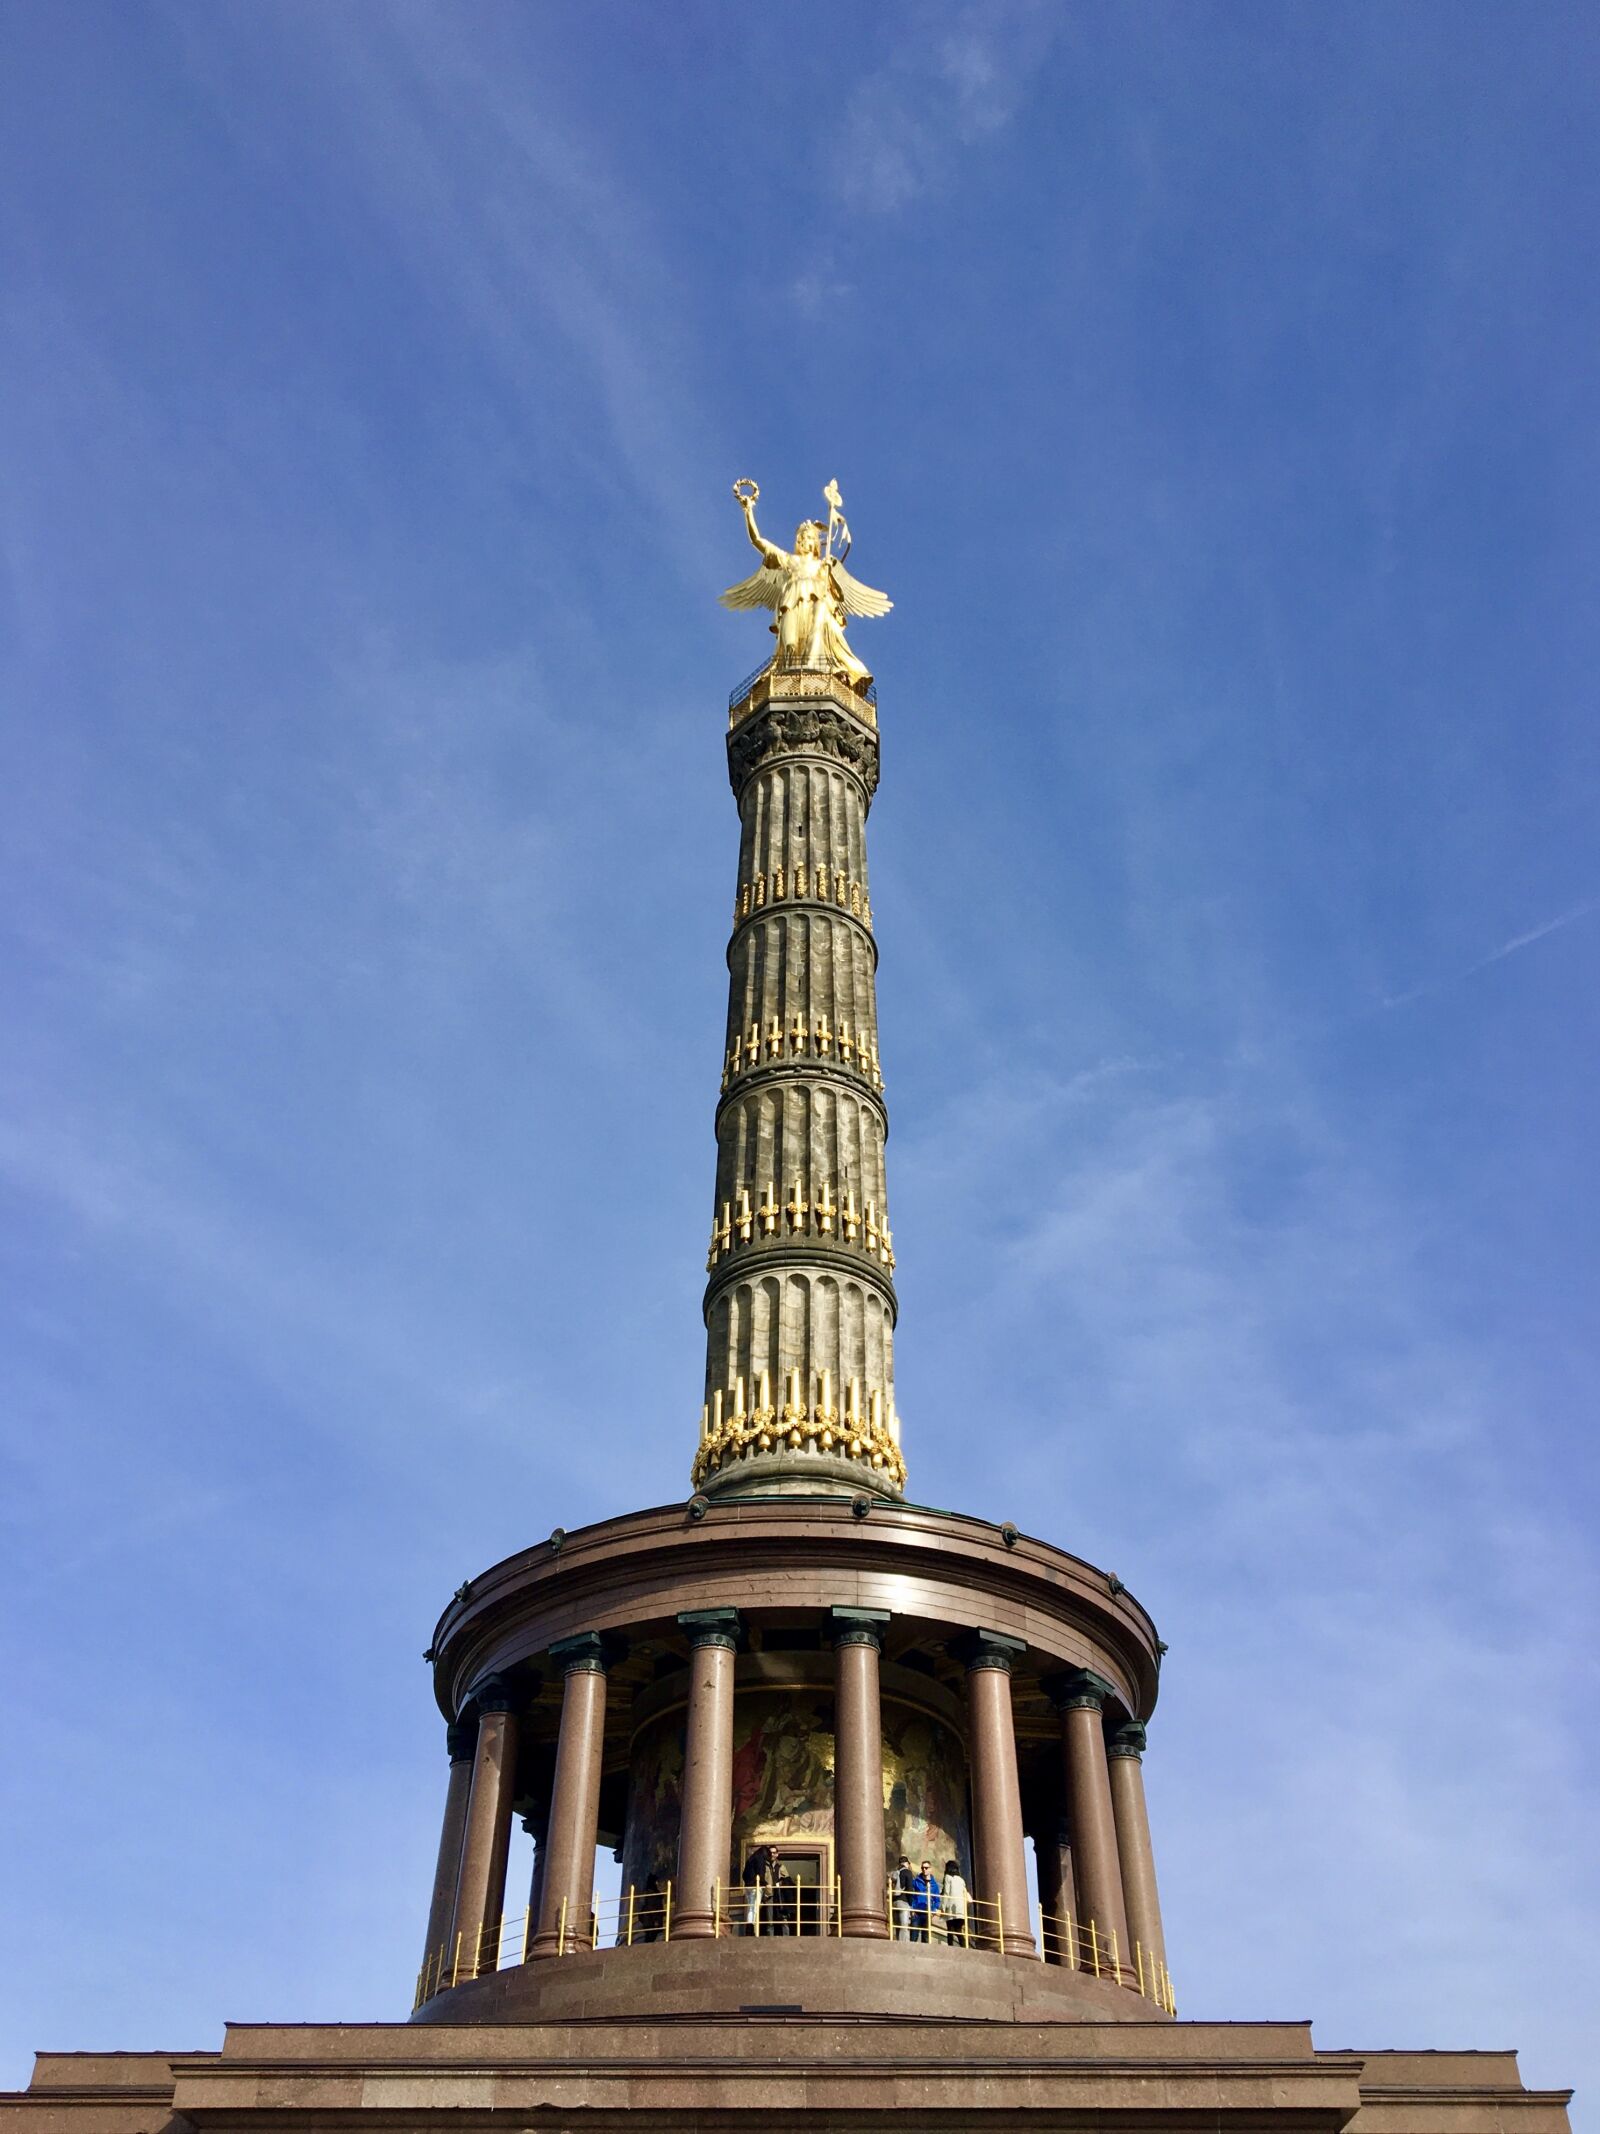 Apple iPhone 6s sample photo. Siegess ule, victory column photography